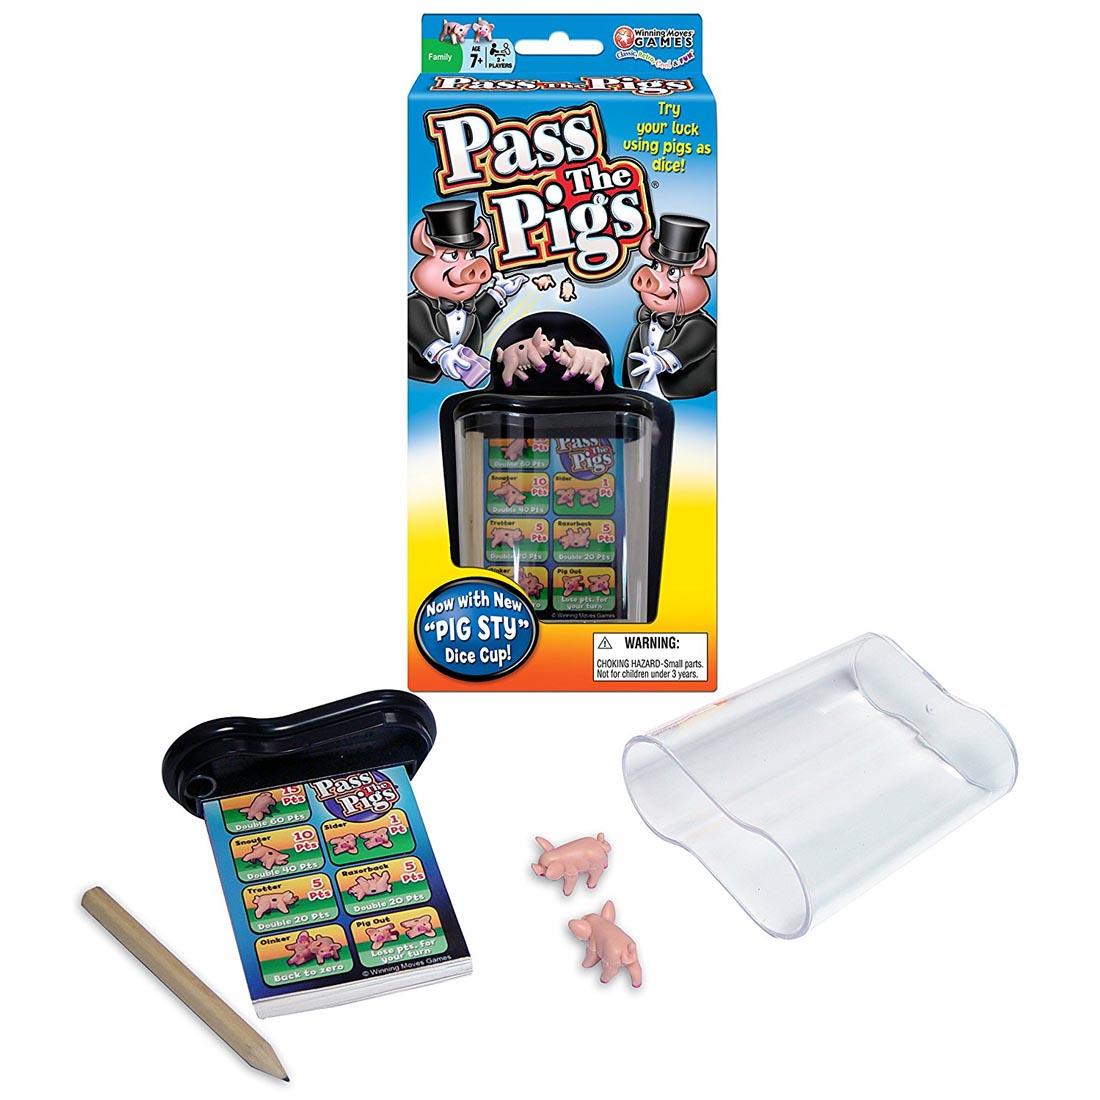 box and contents of Pass the Pigs dice Game